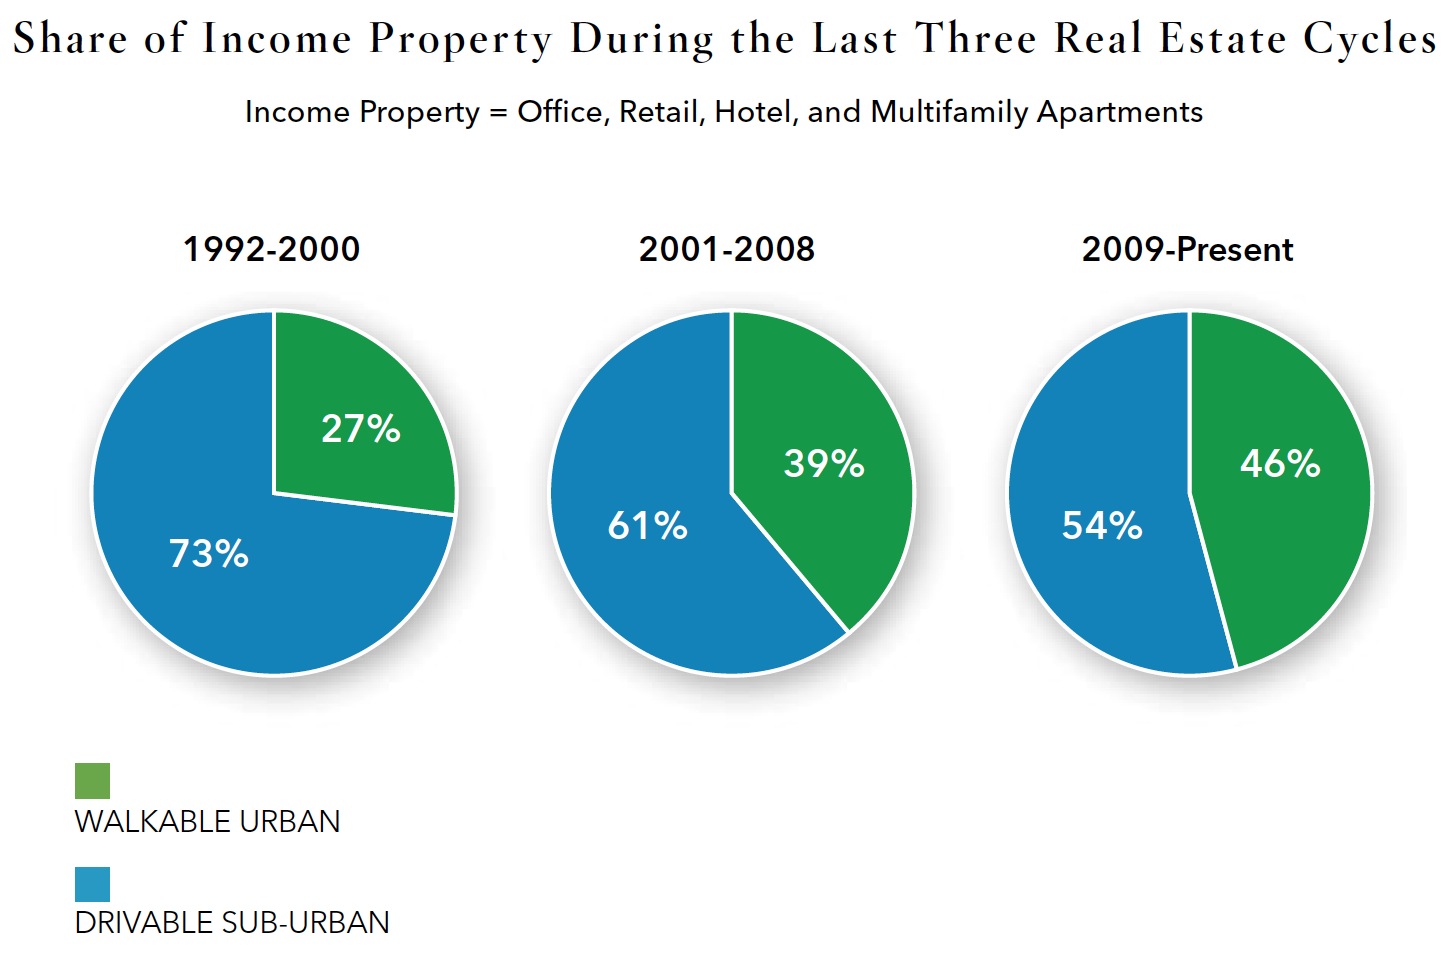 Share of Income Property During the Last Three Real Estate Cycles